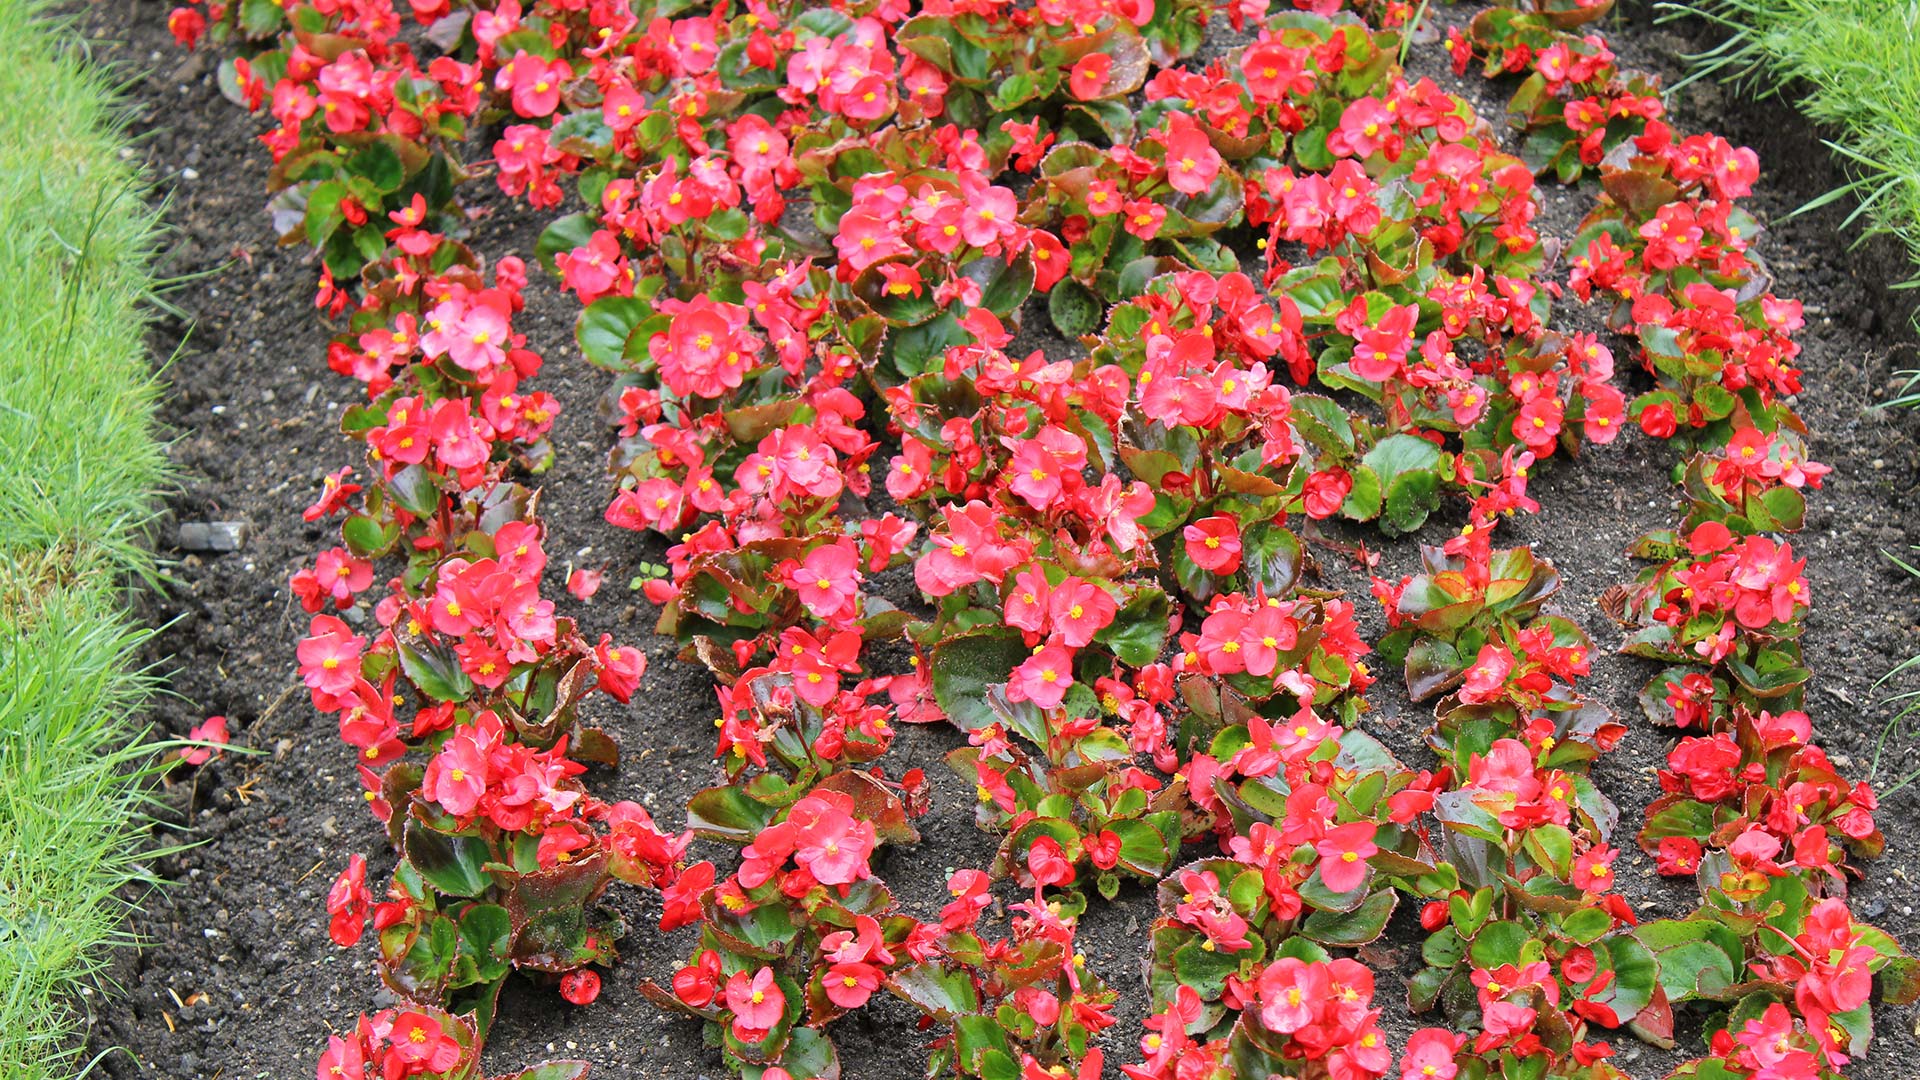 A bed of red flowers in Perrysville, OH.